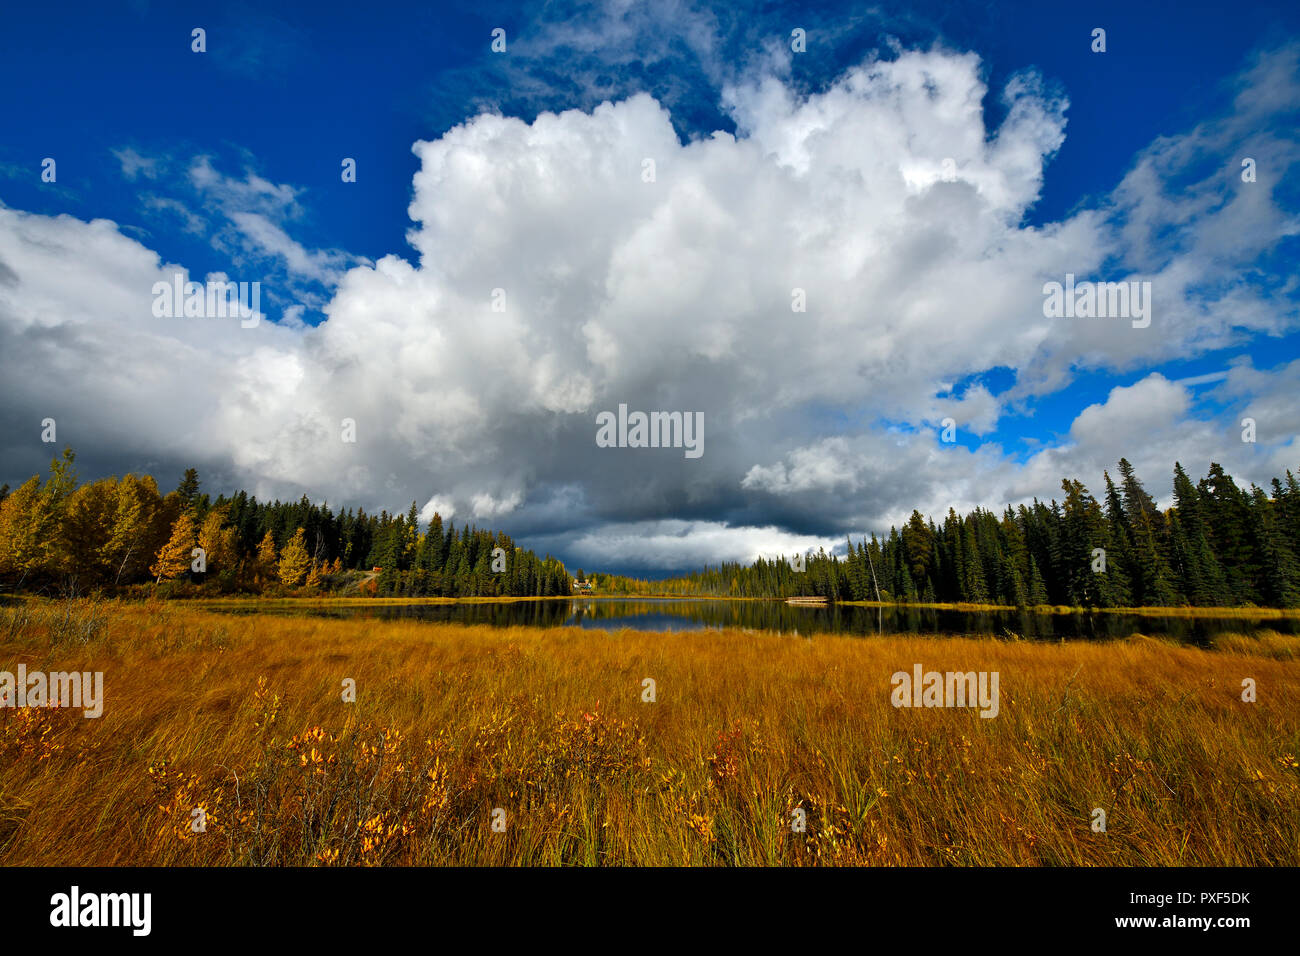 A fall landscape image of Maxwell lake in Hinton Alberta Canada with a large cloud poised above the calm waters of the lake. Stock Photo